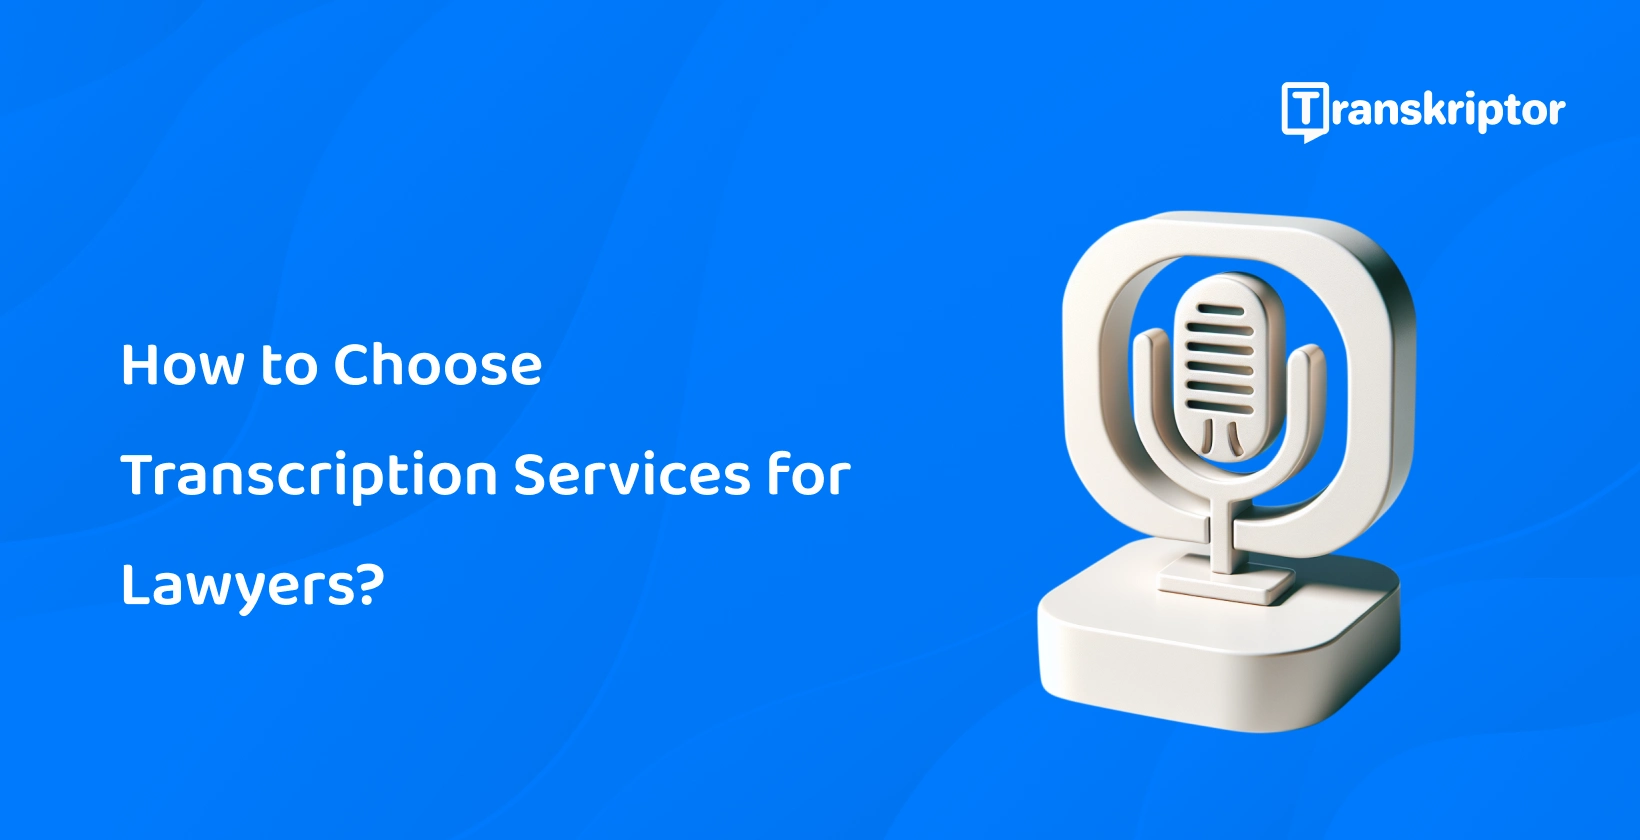 Transcription services for legal professionals showcased with a microphone icon.